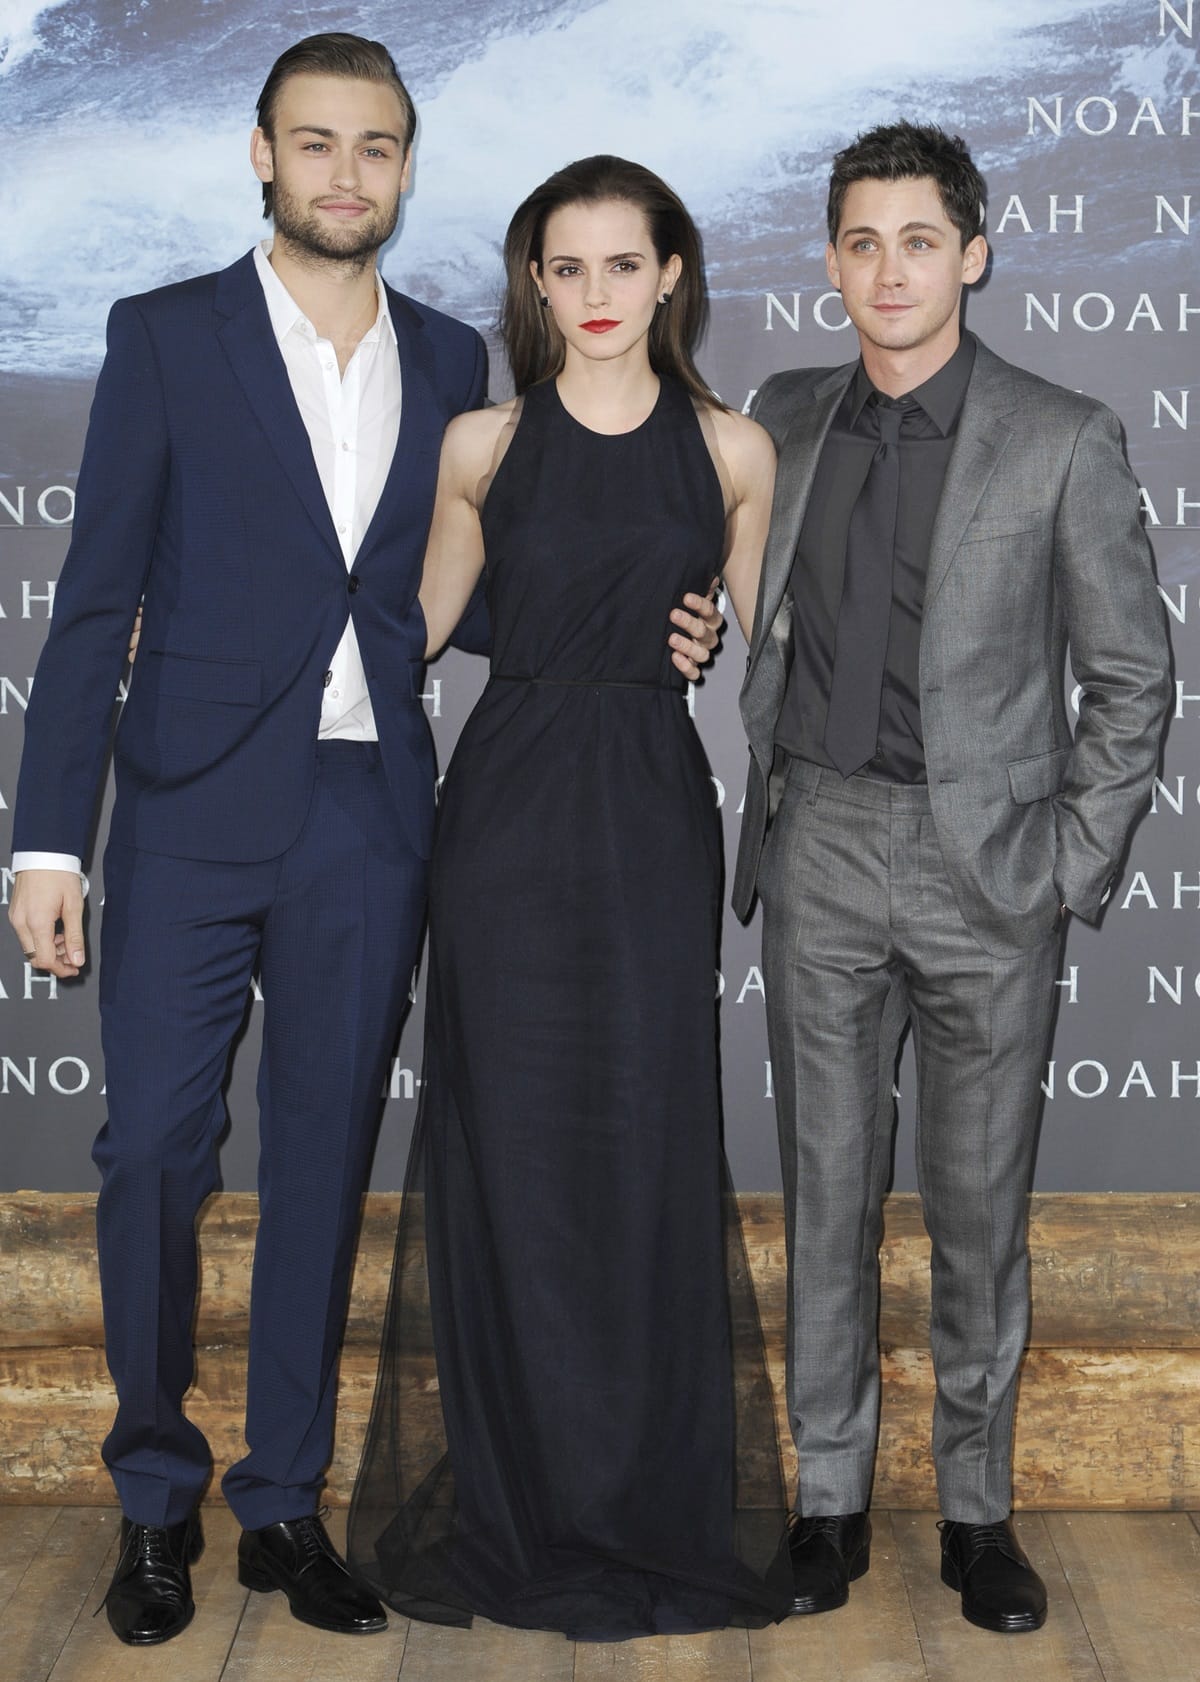 Logan Lerman has a height of 5ft 7 ½ (171.5 cm), Douglas Booth stands at 6ft 0 (182.9 cm), and Emma Watson's height is 5ft 4 ¾ (164.5 cm)